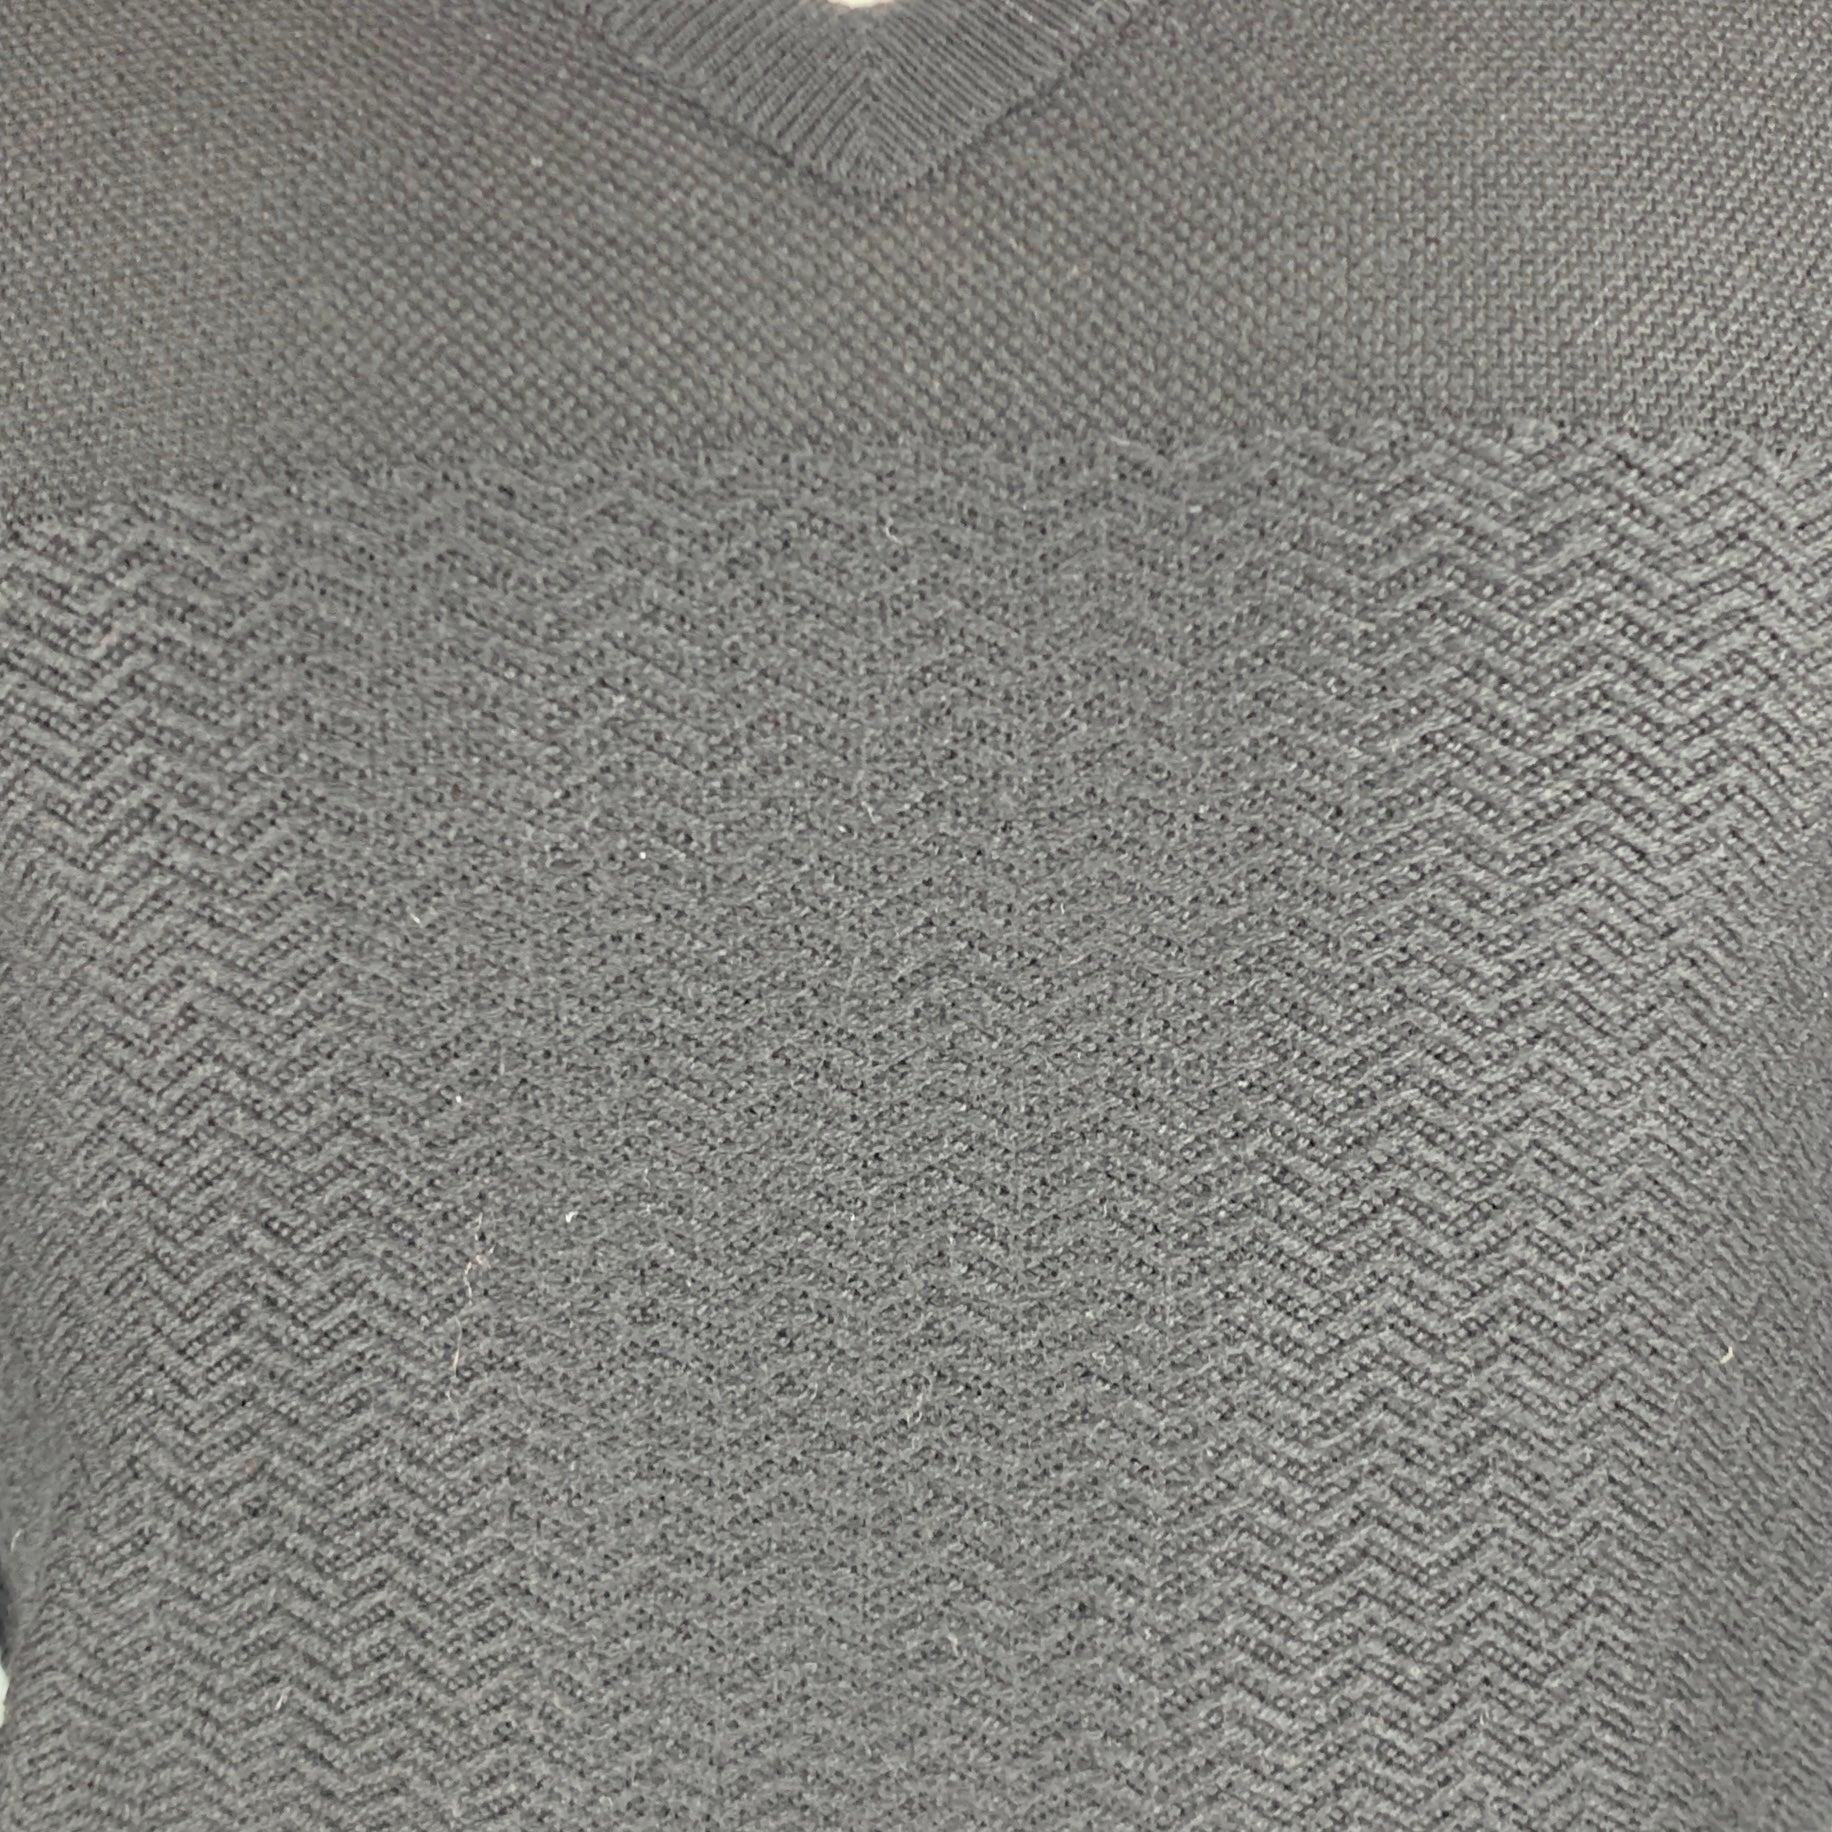 DIOR HOMME pullover
in a black virgin wool knit featuring contrasting knit techniques, blouson sleeves, and V-neck. Made in Italy.Very Good Pre-Owned Condition. Minor mark, and holes on left cuff. 

Marked:   XS 

Measurements: 
 
Shoulder: 16